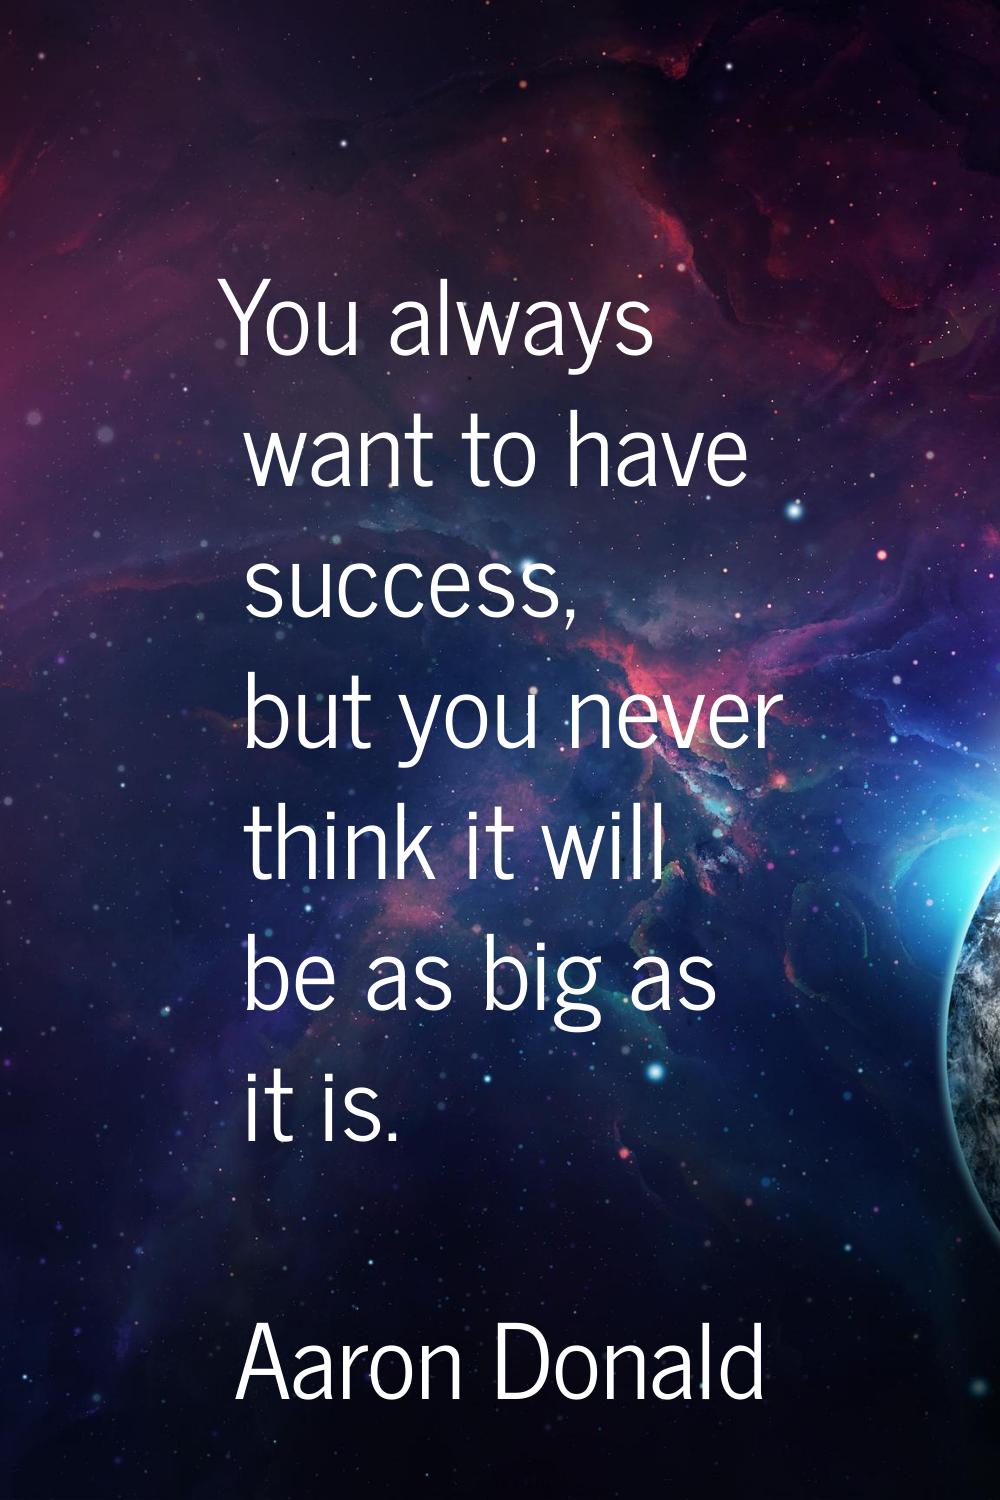 You always want to have success, but you never think it will be as big as it is.